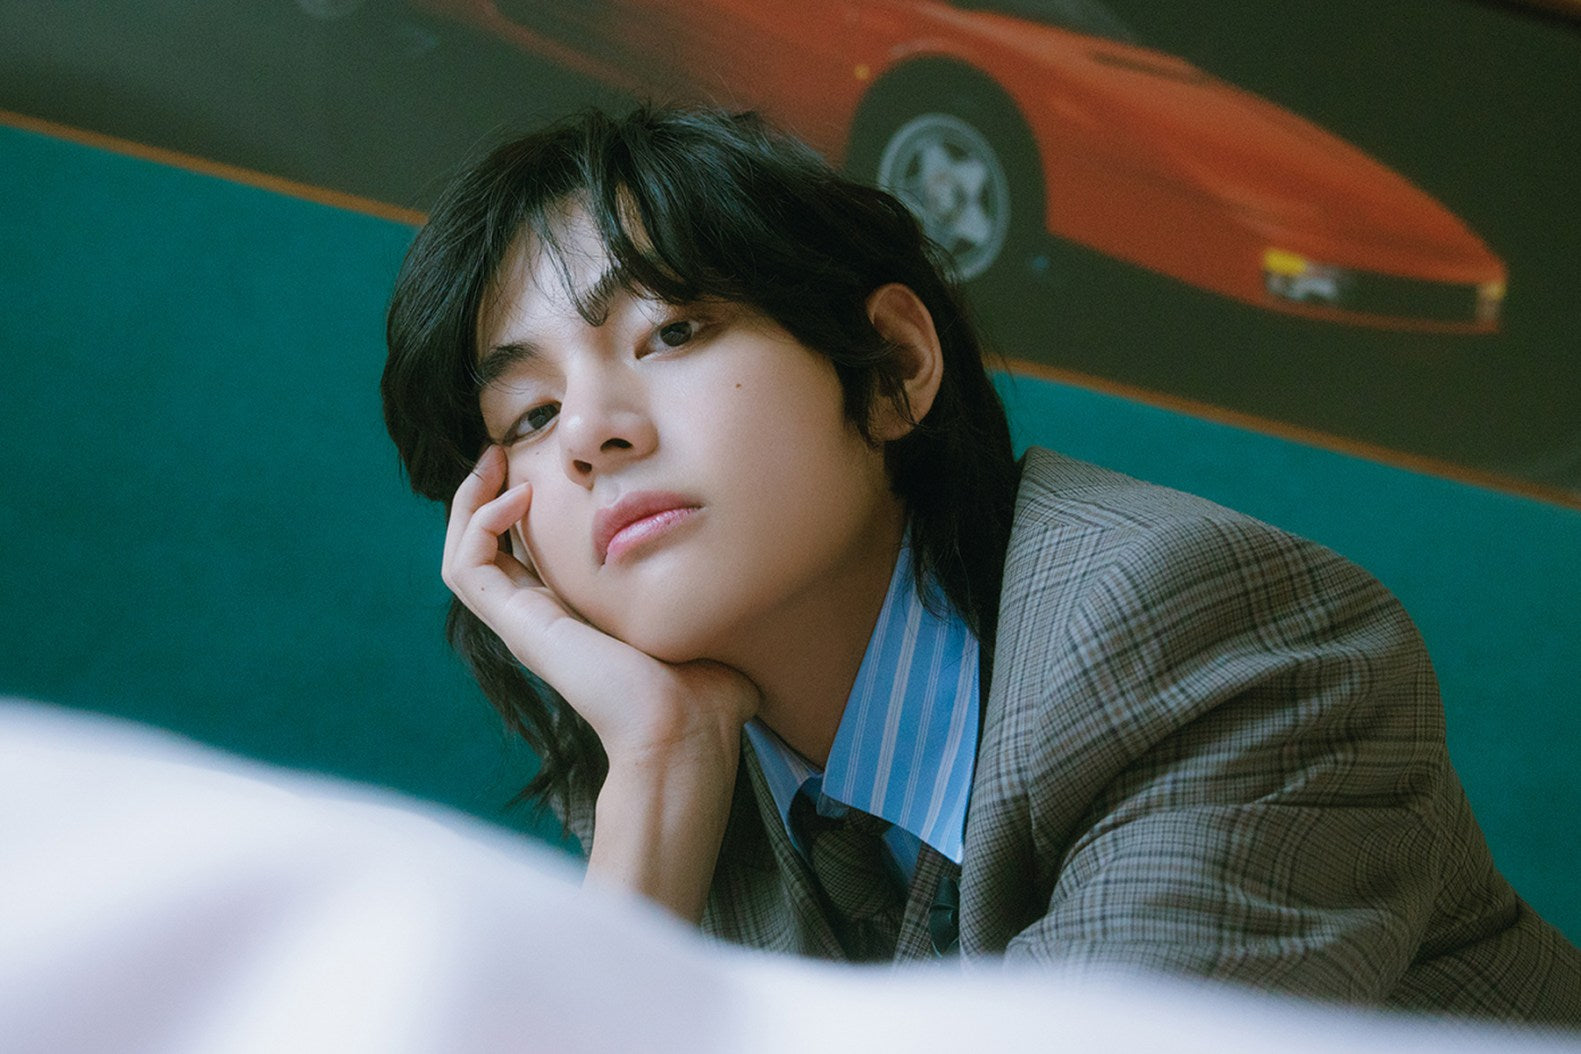 Kpop Planet News] BTS's V Breaks Album Sales Record With Layover